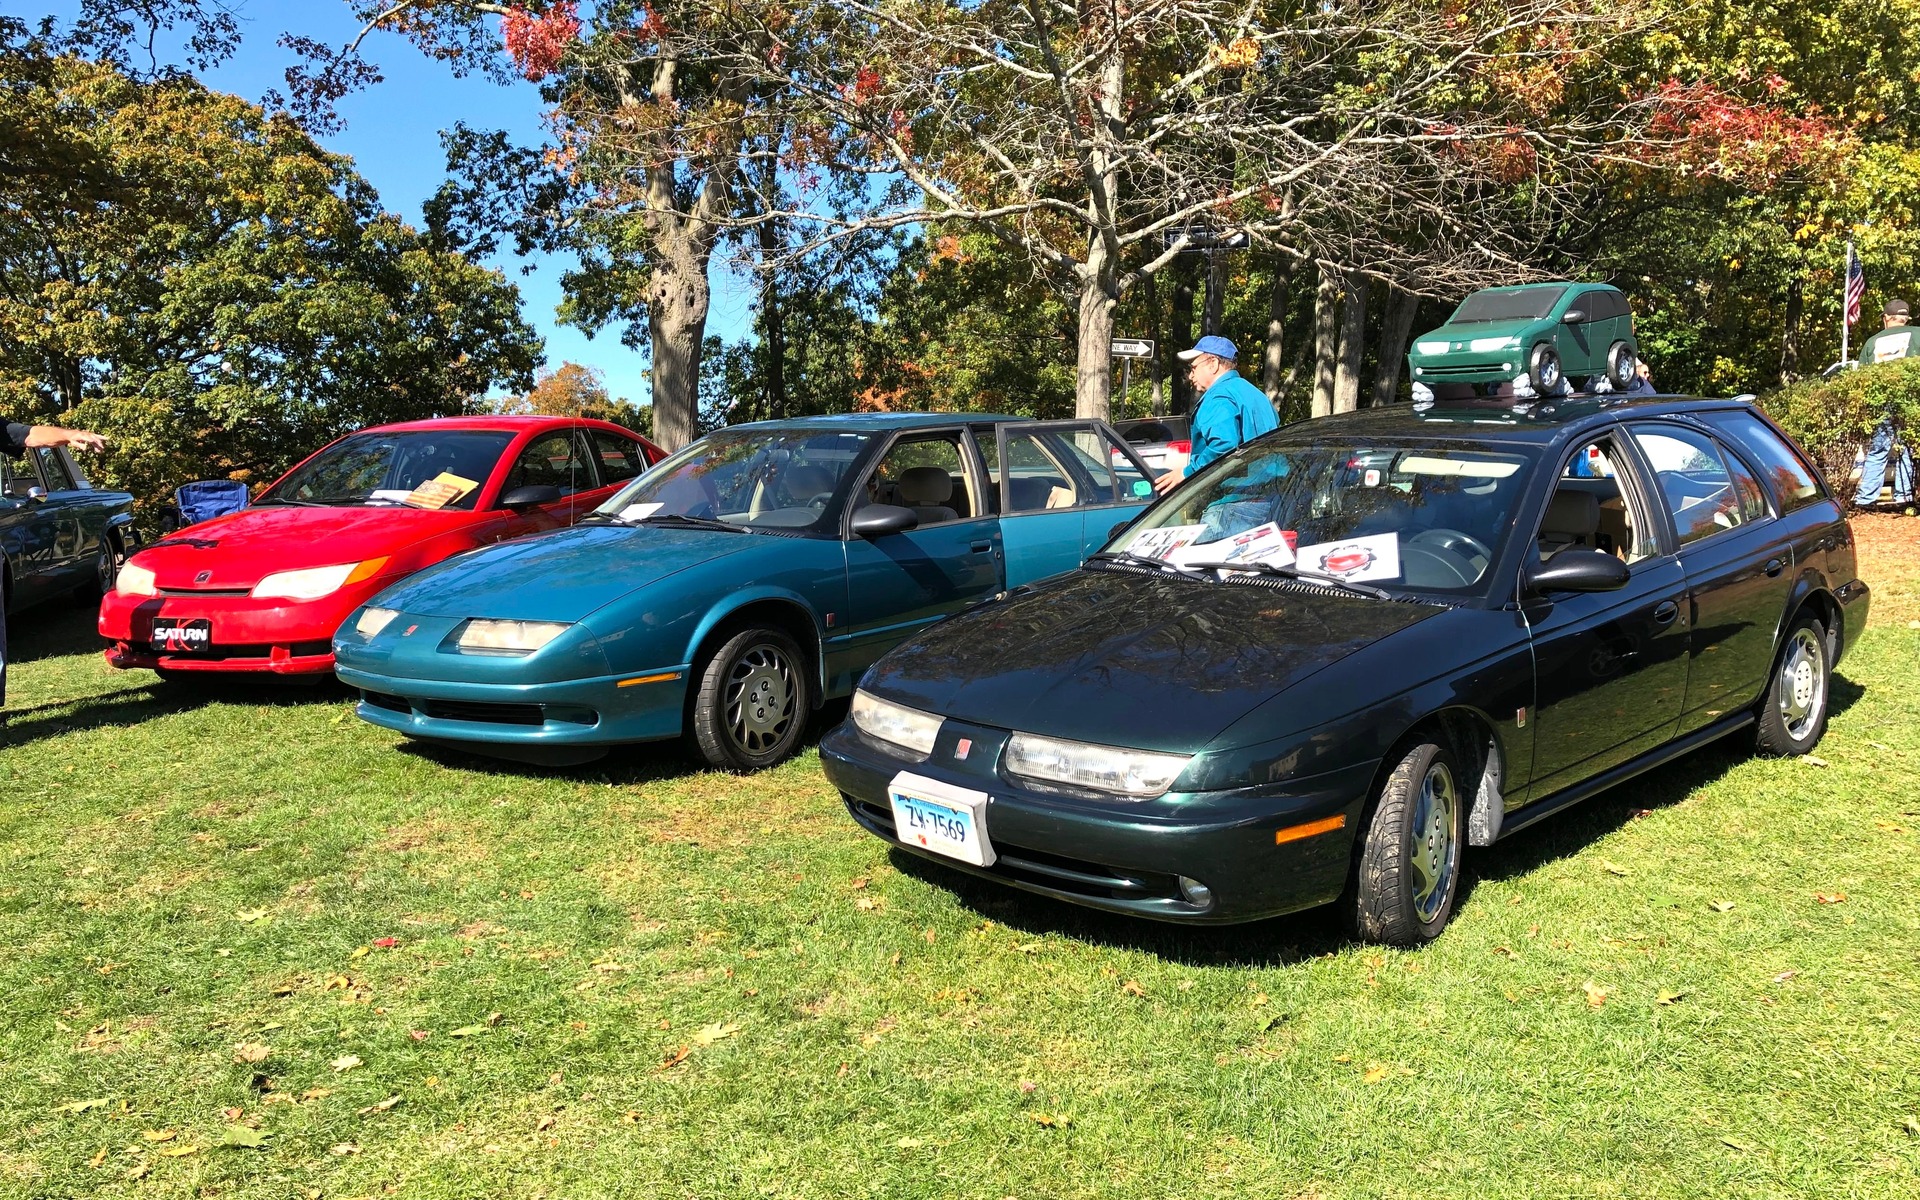 <p><strong>Saturn cars</strong></p>